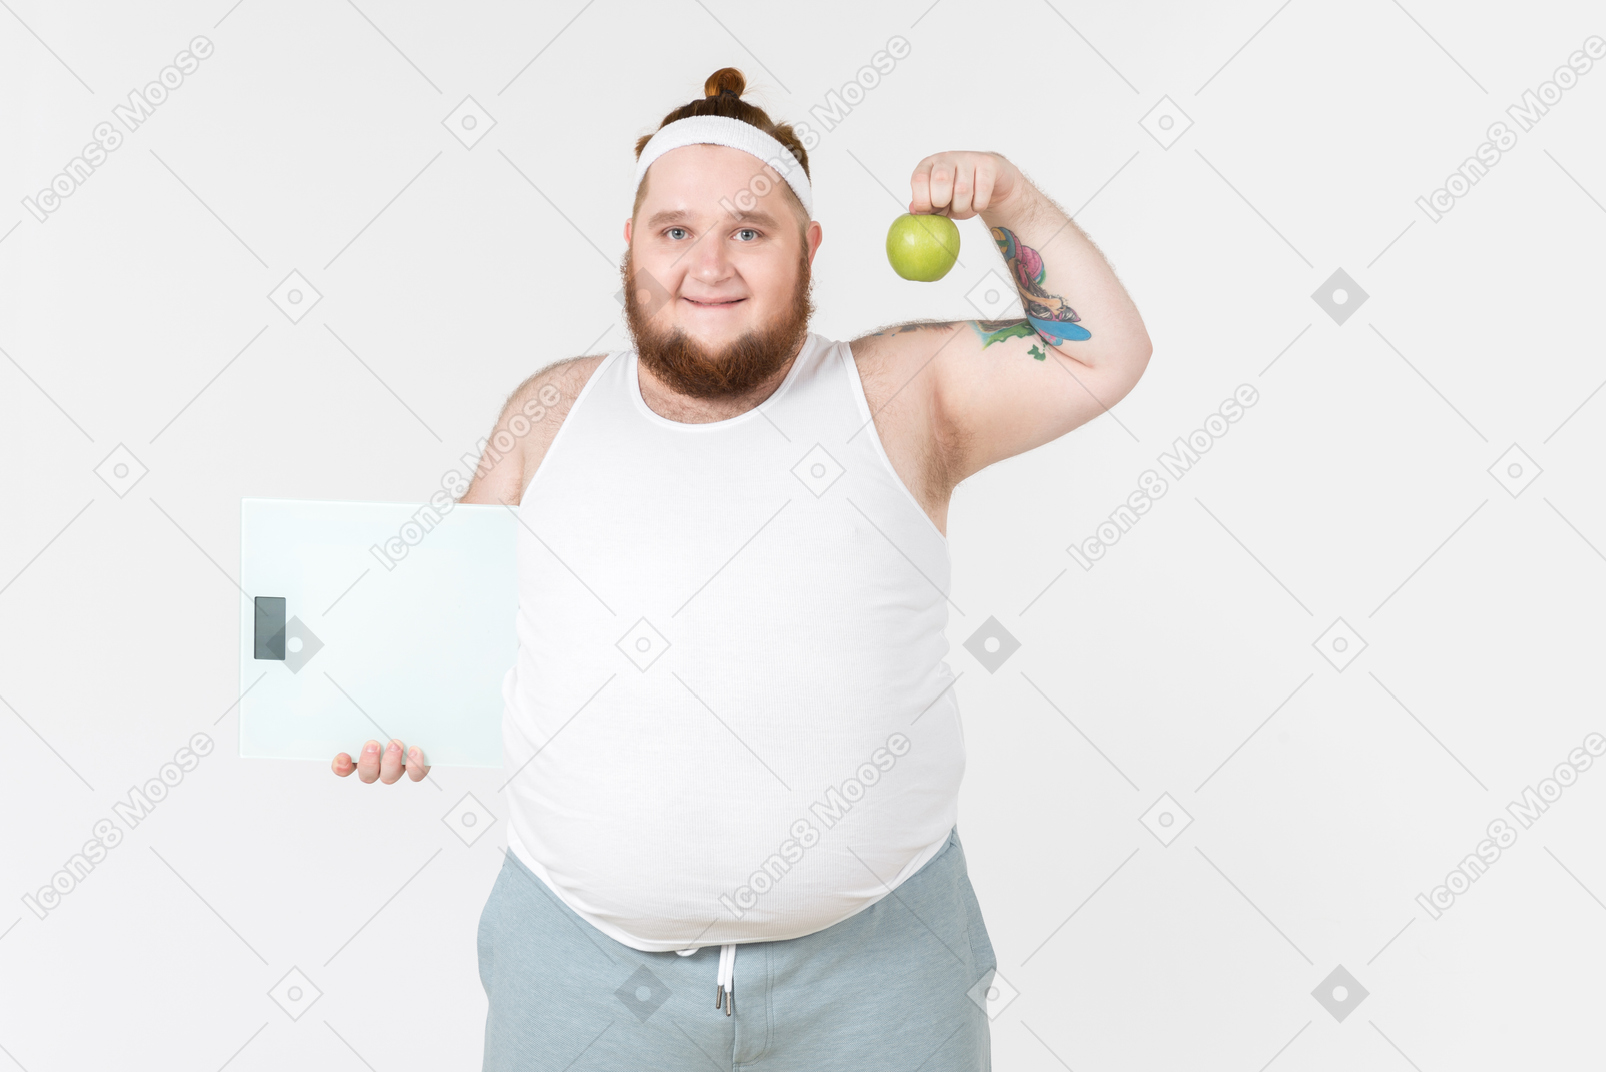 Big guy in sportswear holding scales and apple